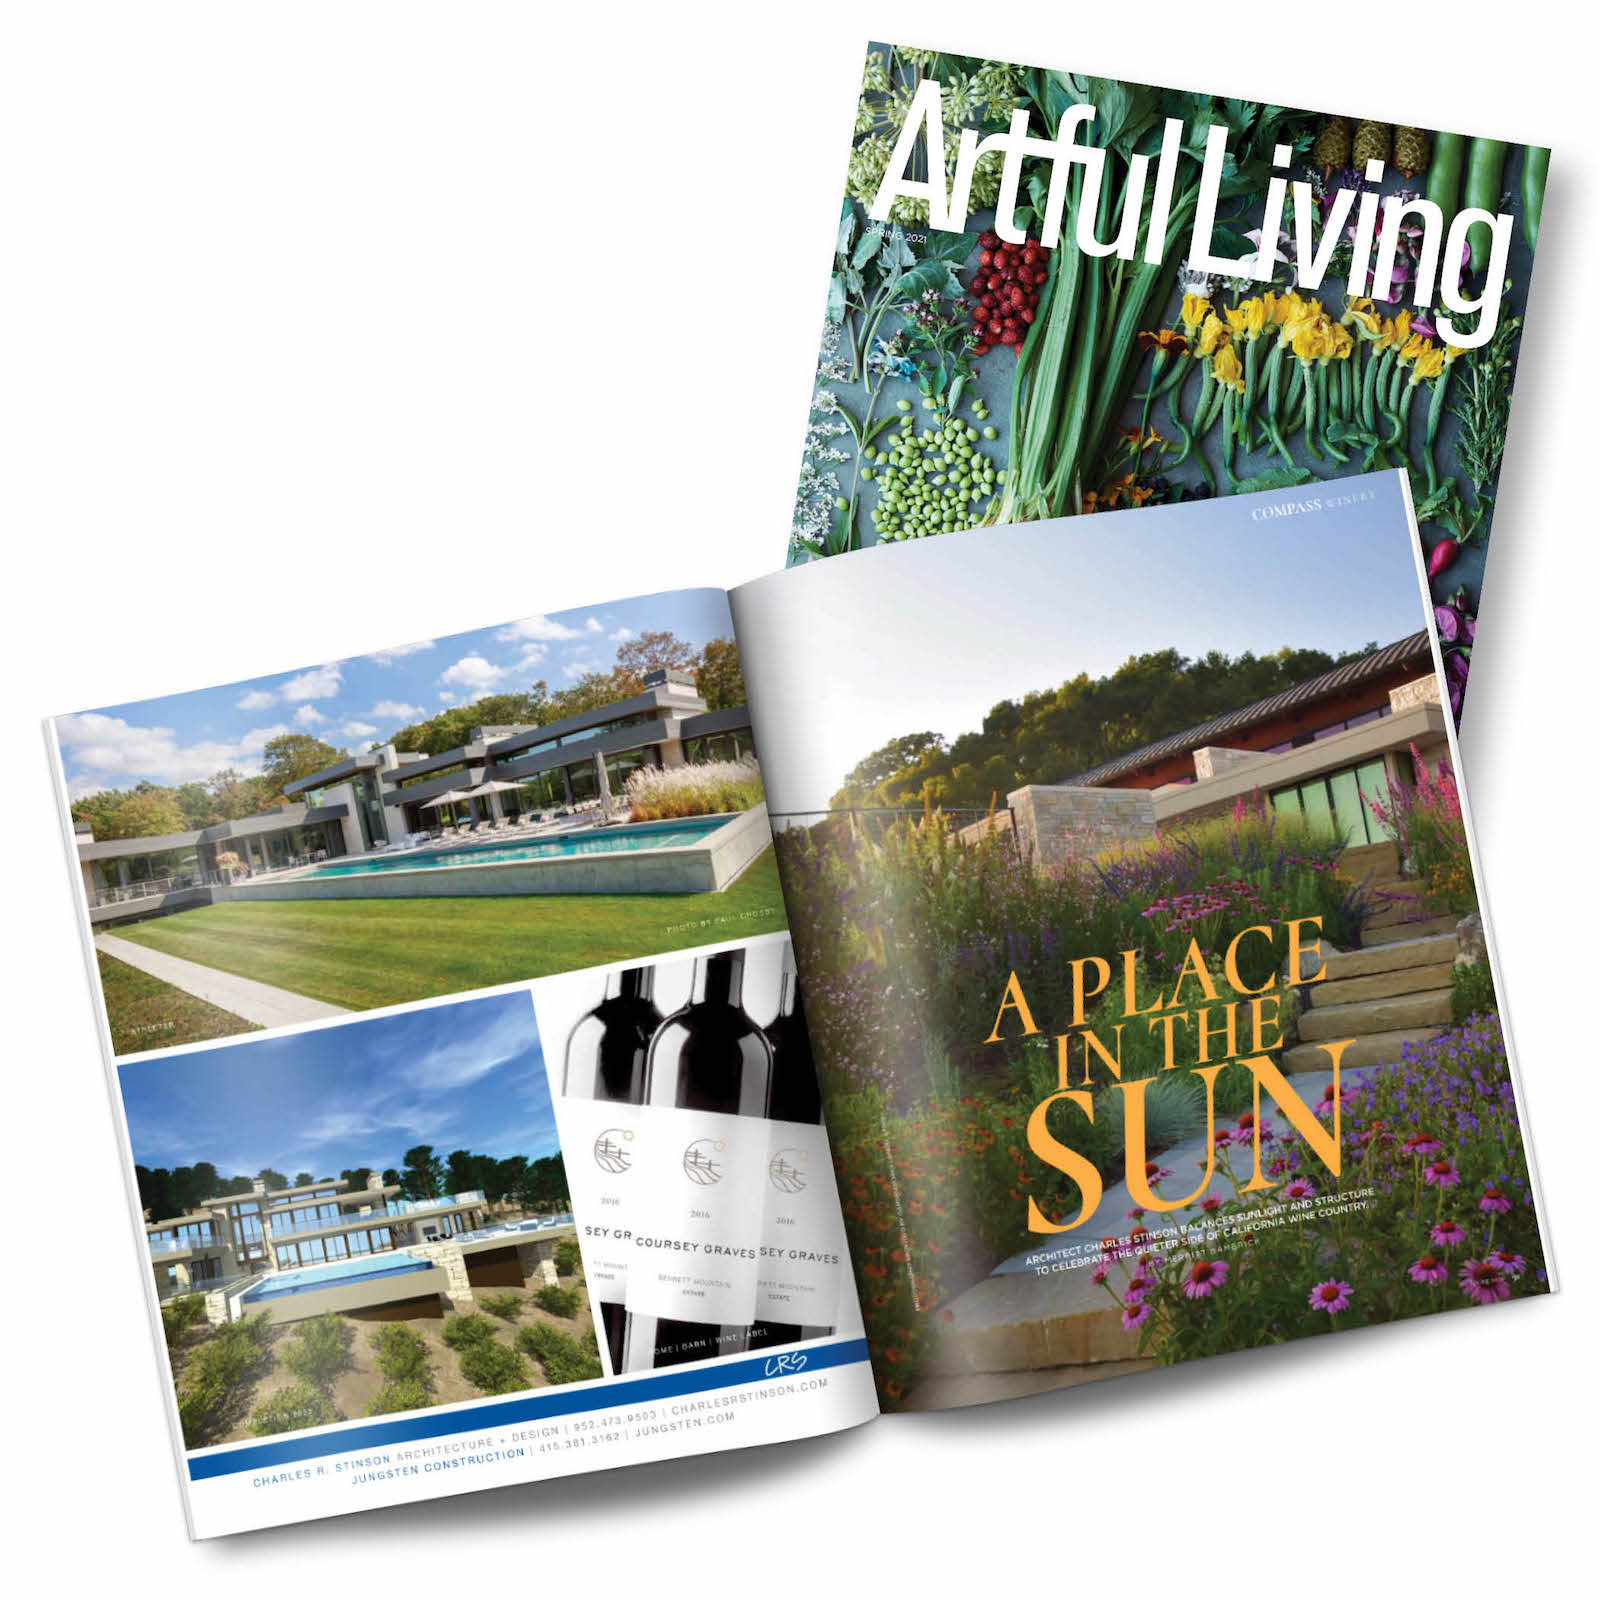 Image of Charles R. Stinson feature in Artful Living Magazine for Coursey Graves Winery.